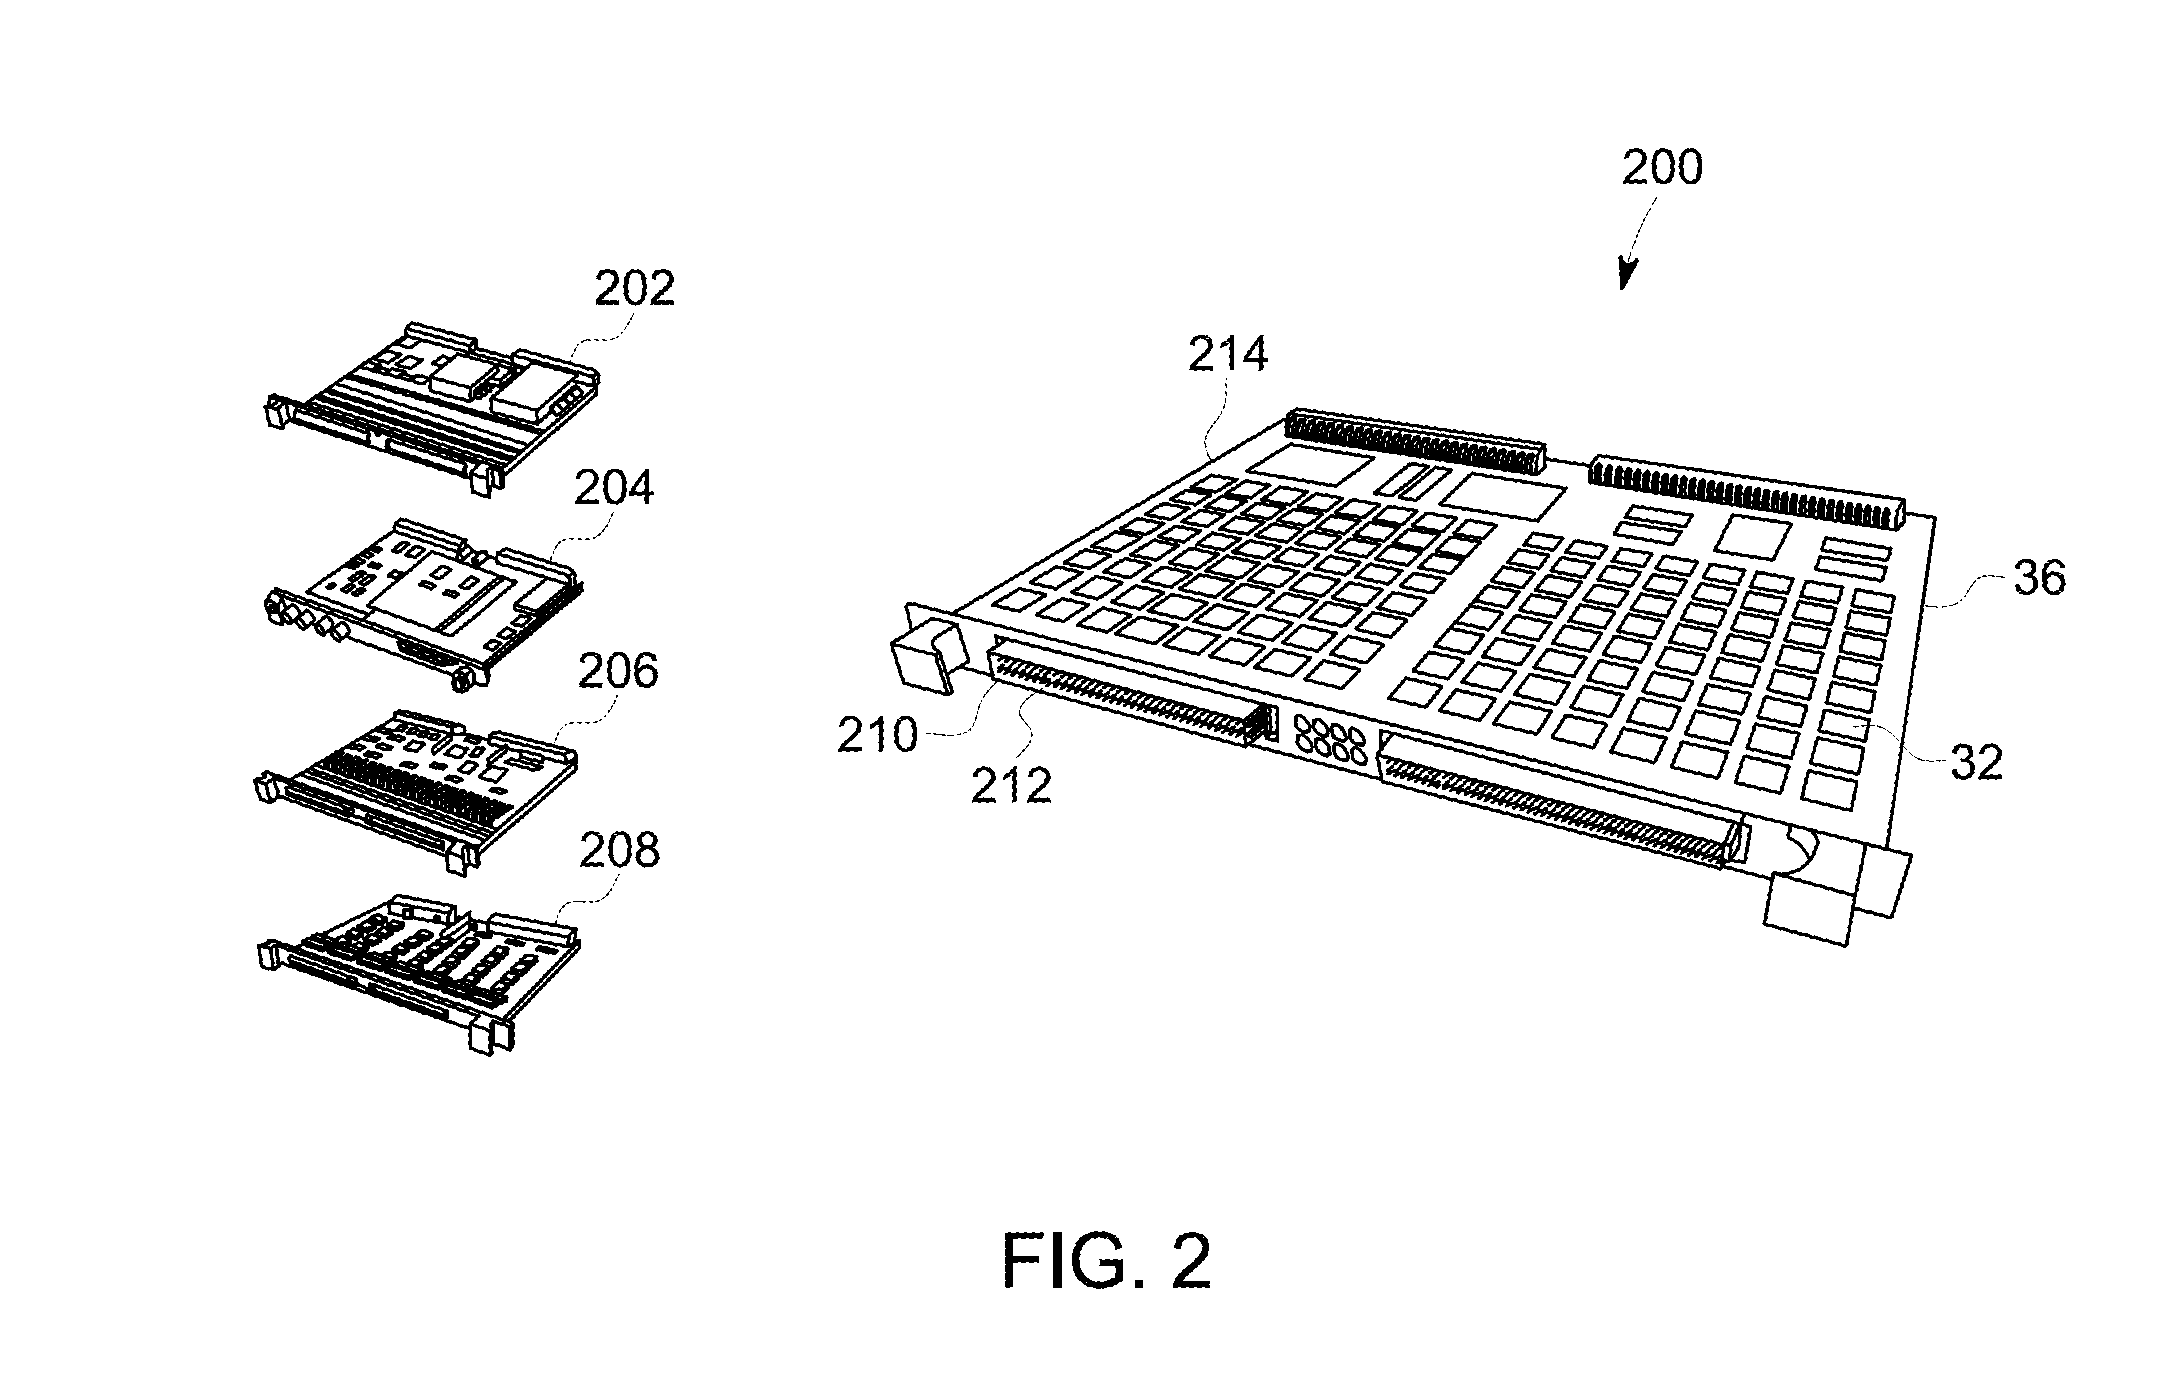 Input/output module for programmable logic controller based systems